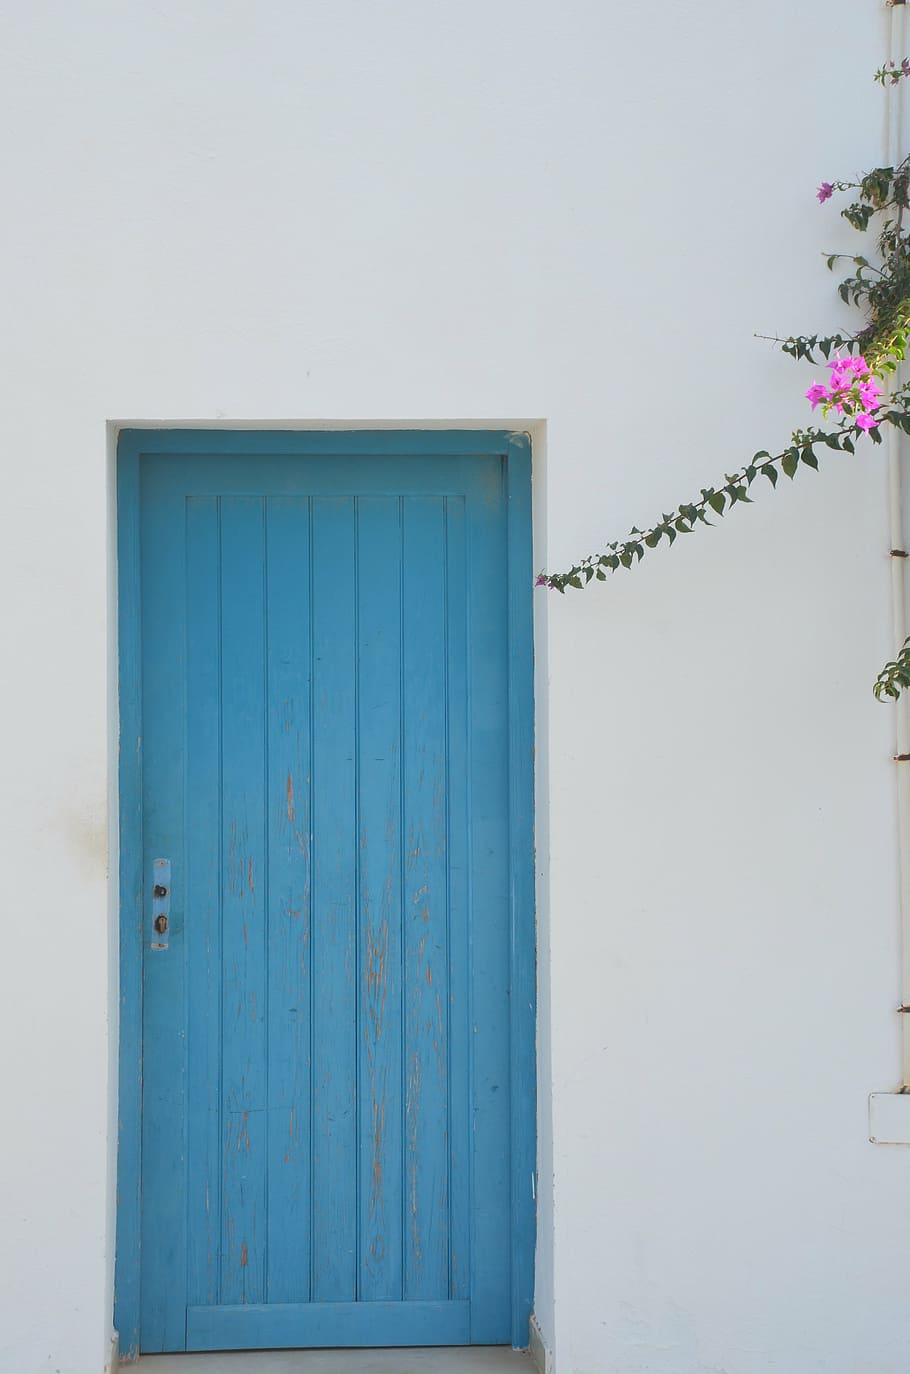 closed, blue, wooden, door, blue white, greece, home, white, flower, architecture